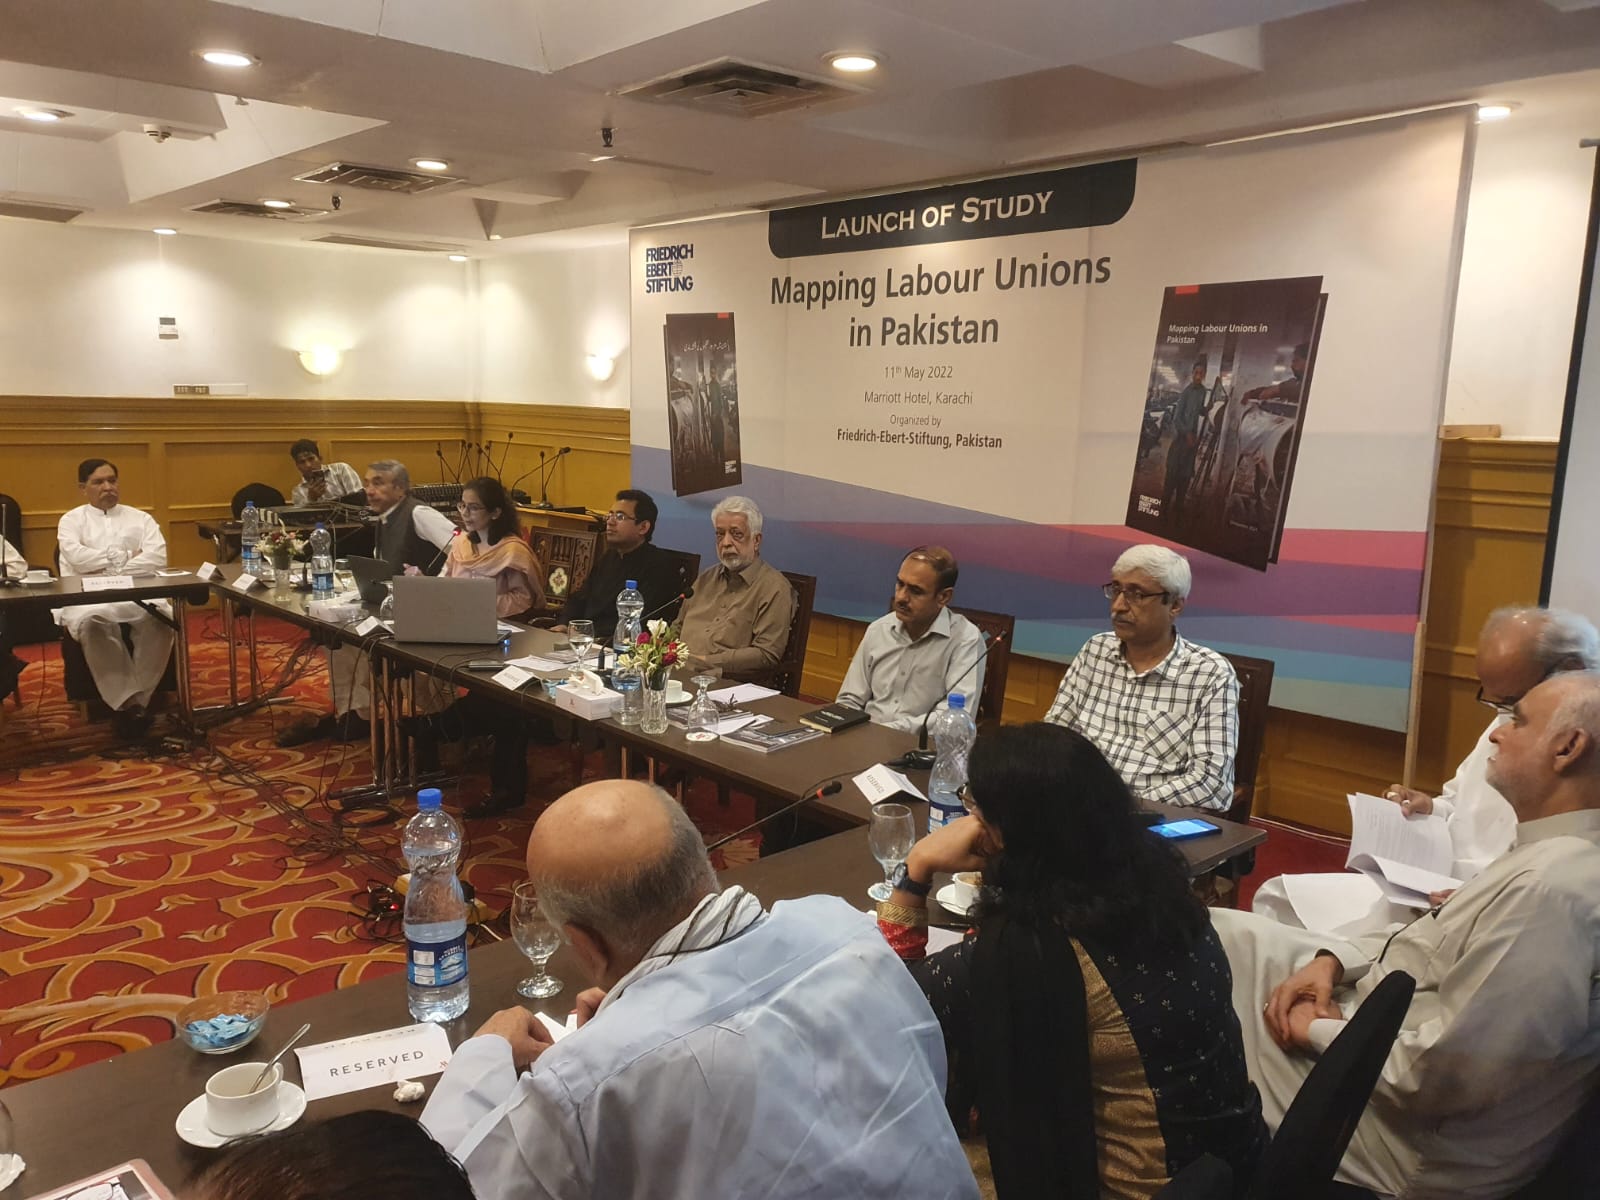 FES launches report “Mapping Labour Unions in Pakistan”